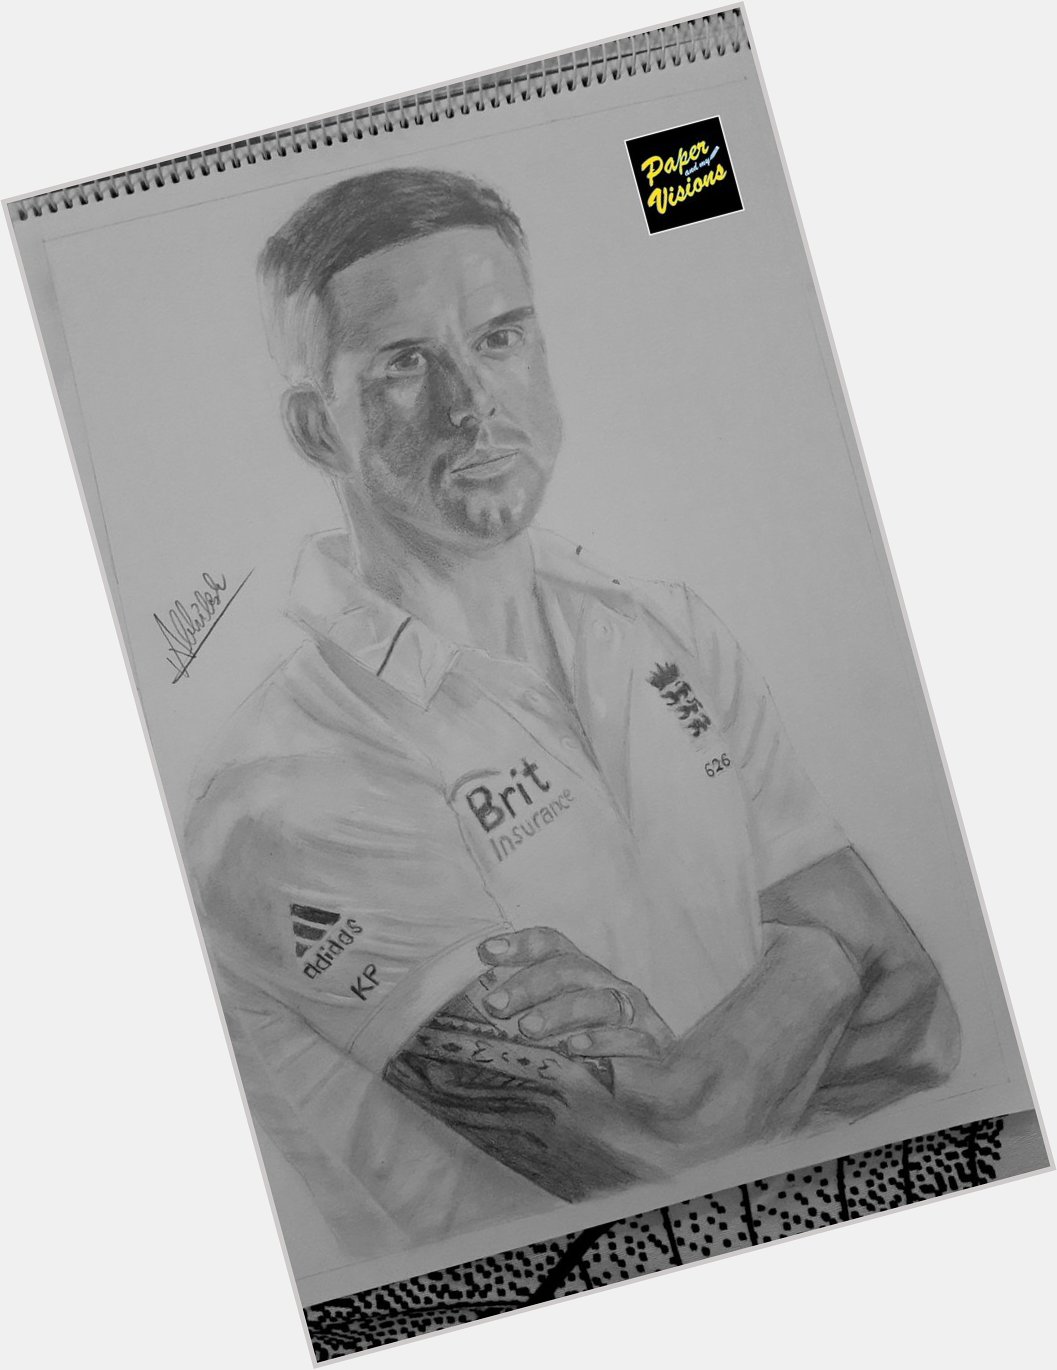 \" Hold onto your hats,
  This is KEVIN PIETERSEN \"

Happy birthday KP   